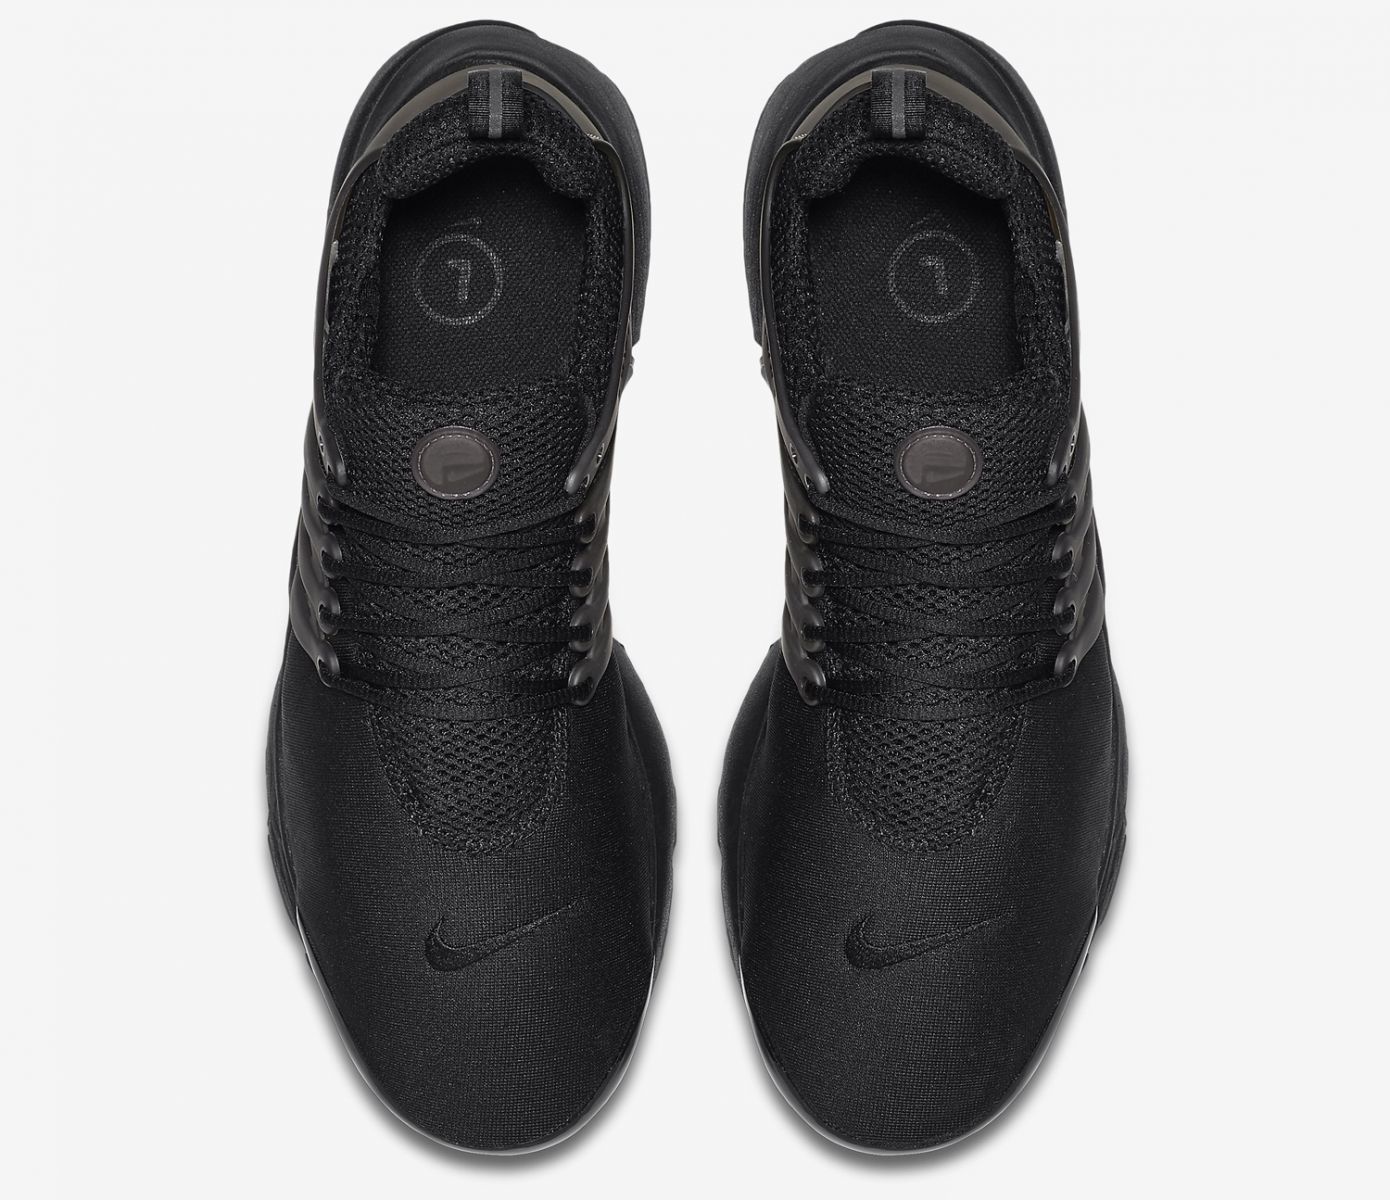 Nike Blacks Out on the Air Presto | Sole Collector